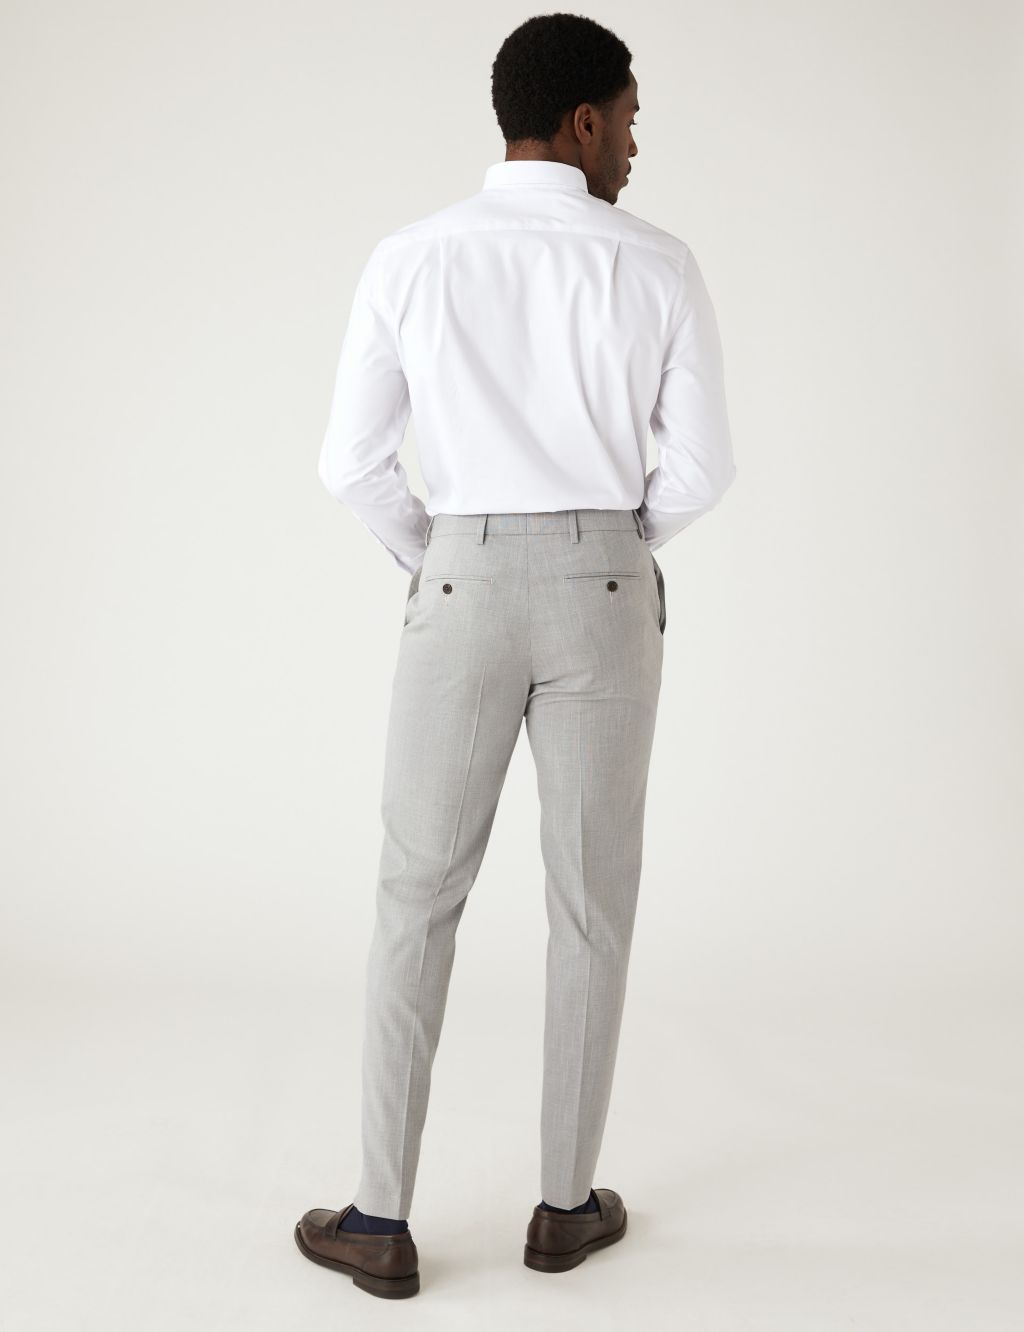 Textured Stretch Trousers image 4